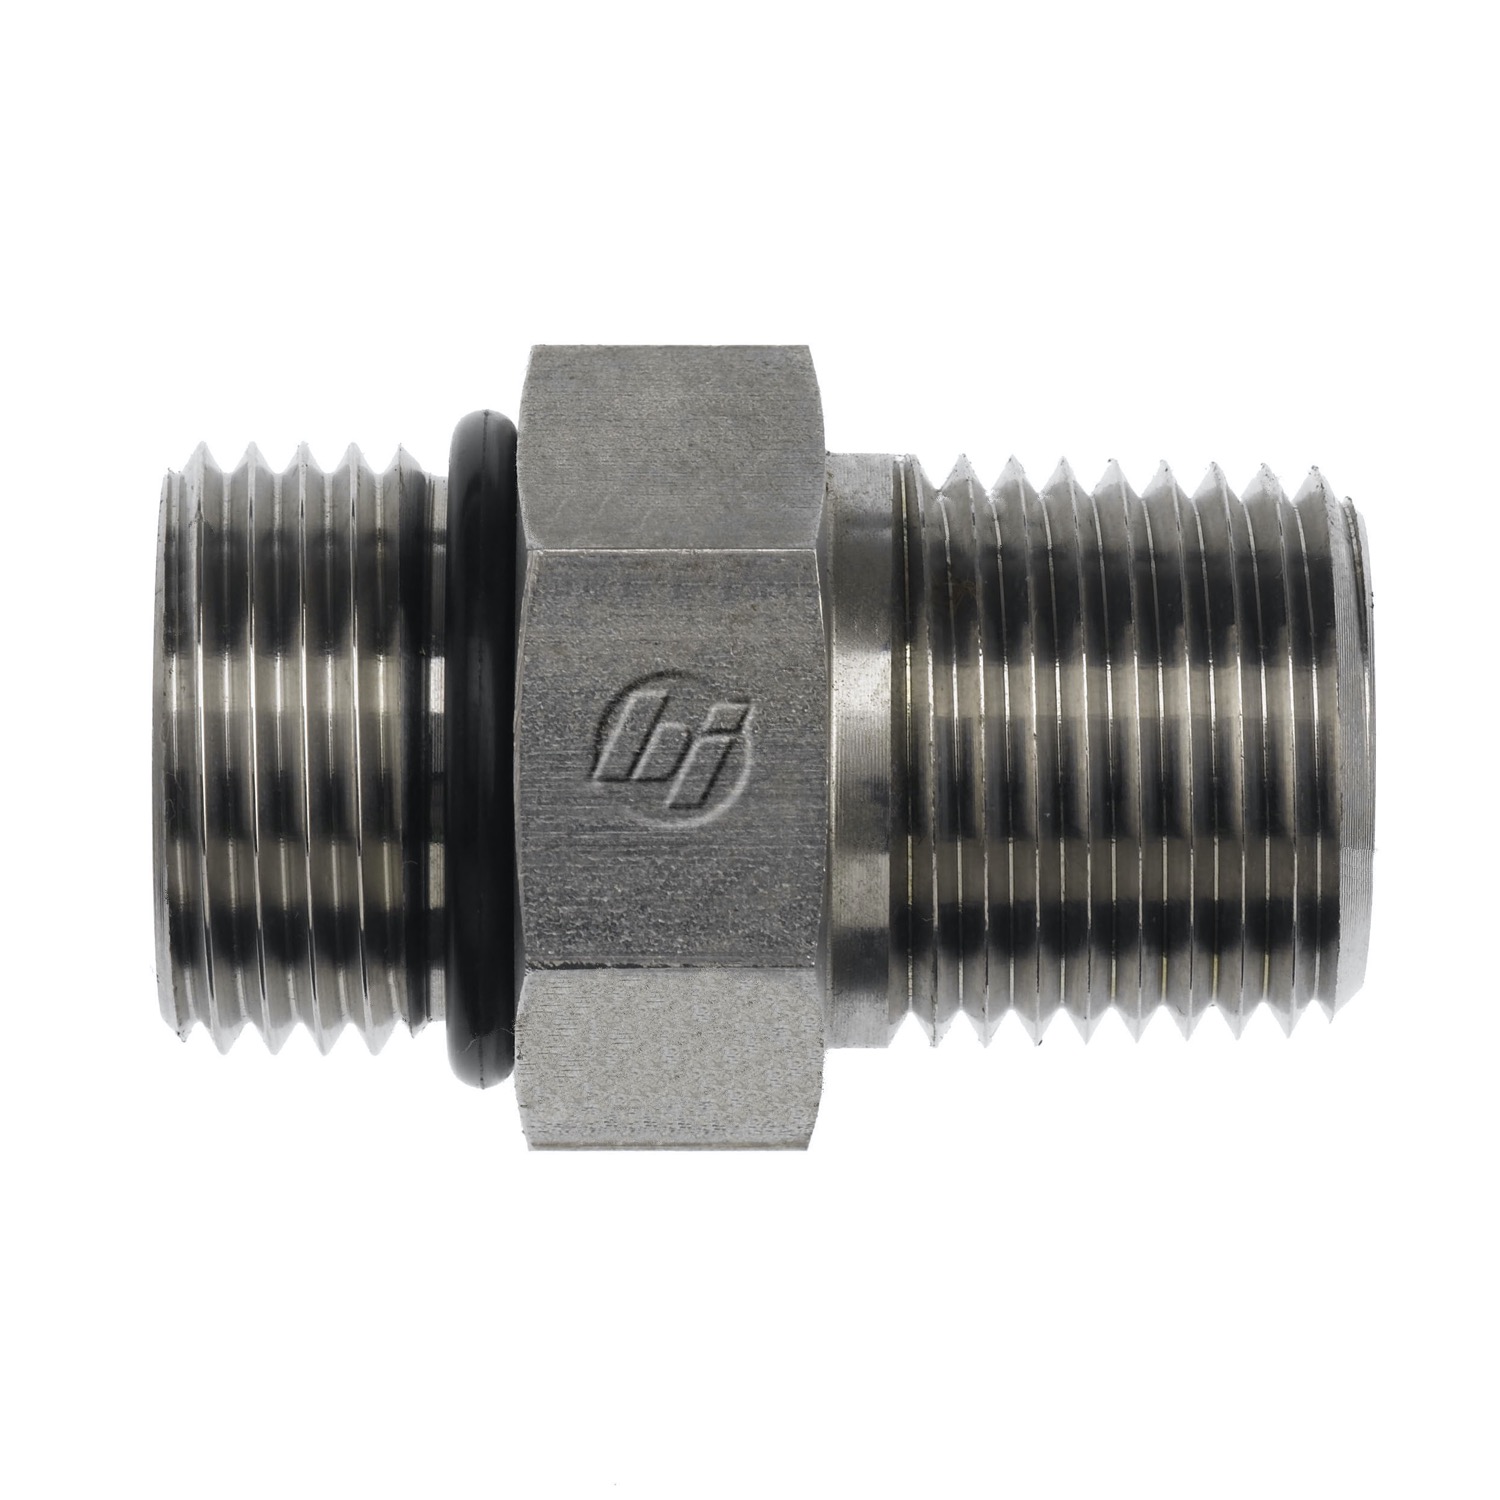 Hydraulic Hose Adapters - Straight Fitting, O-Ring Boss to NPTF, 6401 Series 6401-08-06-O